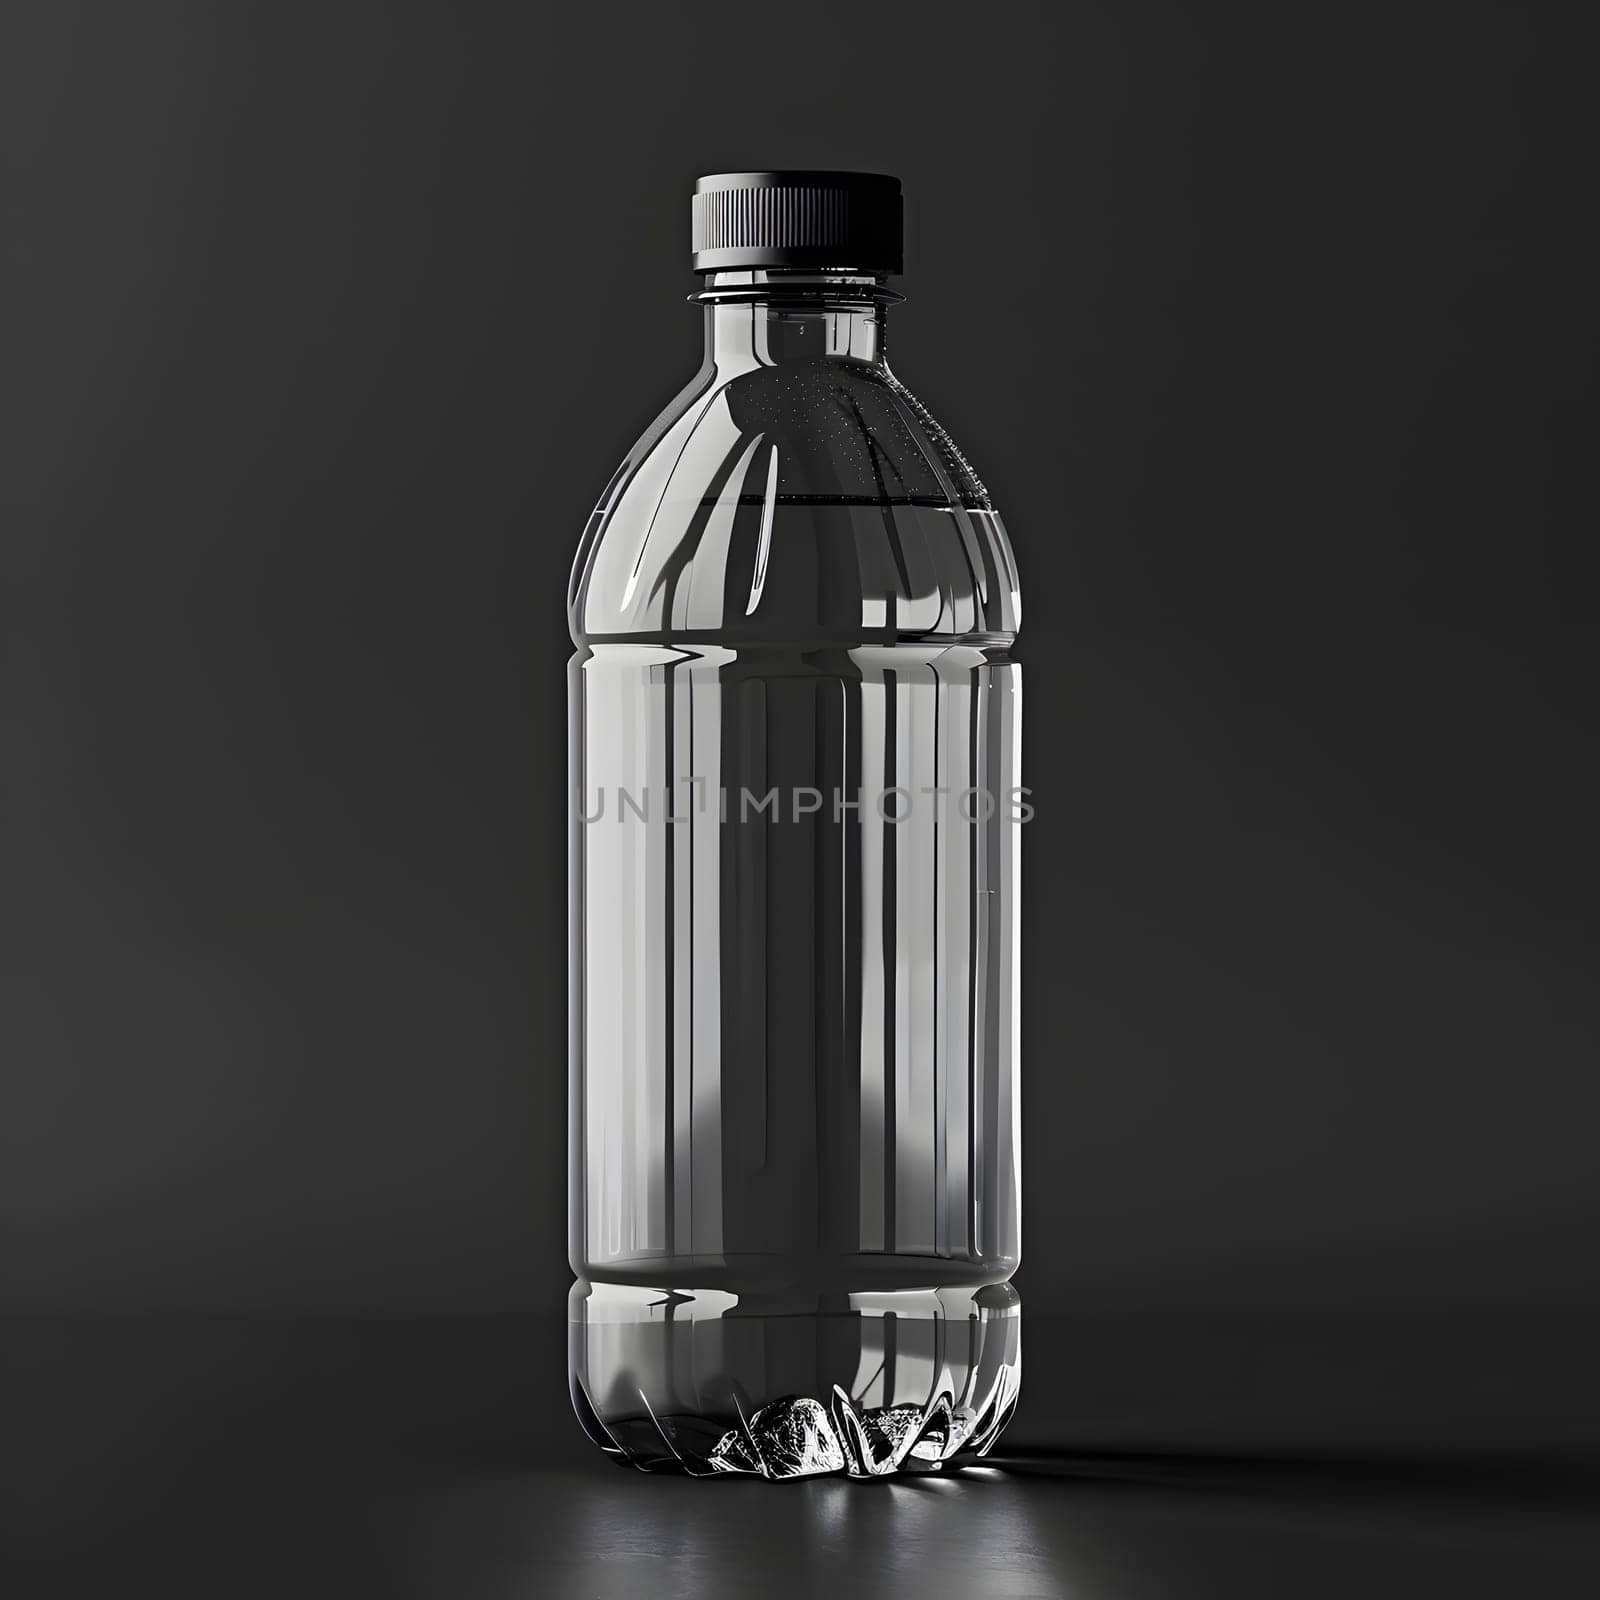 A transparent plastic water bottle with a black cap, set against a black background. This sleek drinkware is perfect for holding liquid and staying hydrated